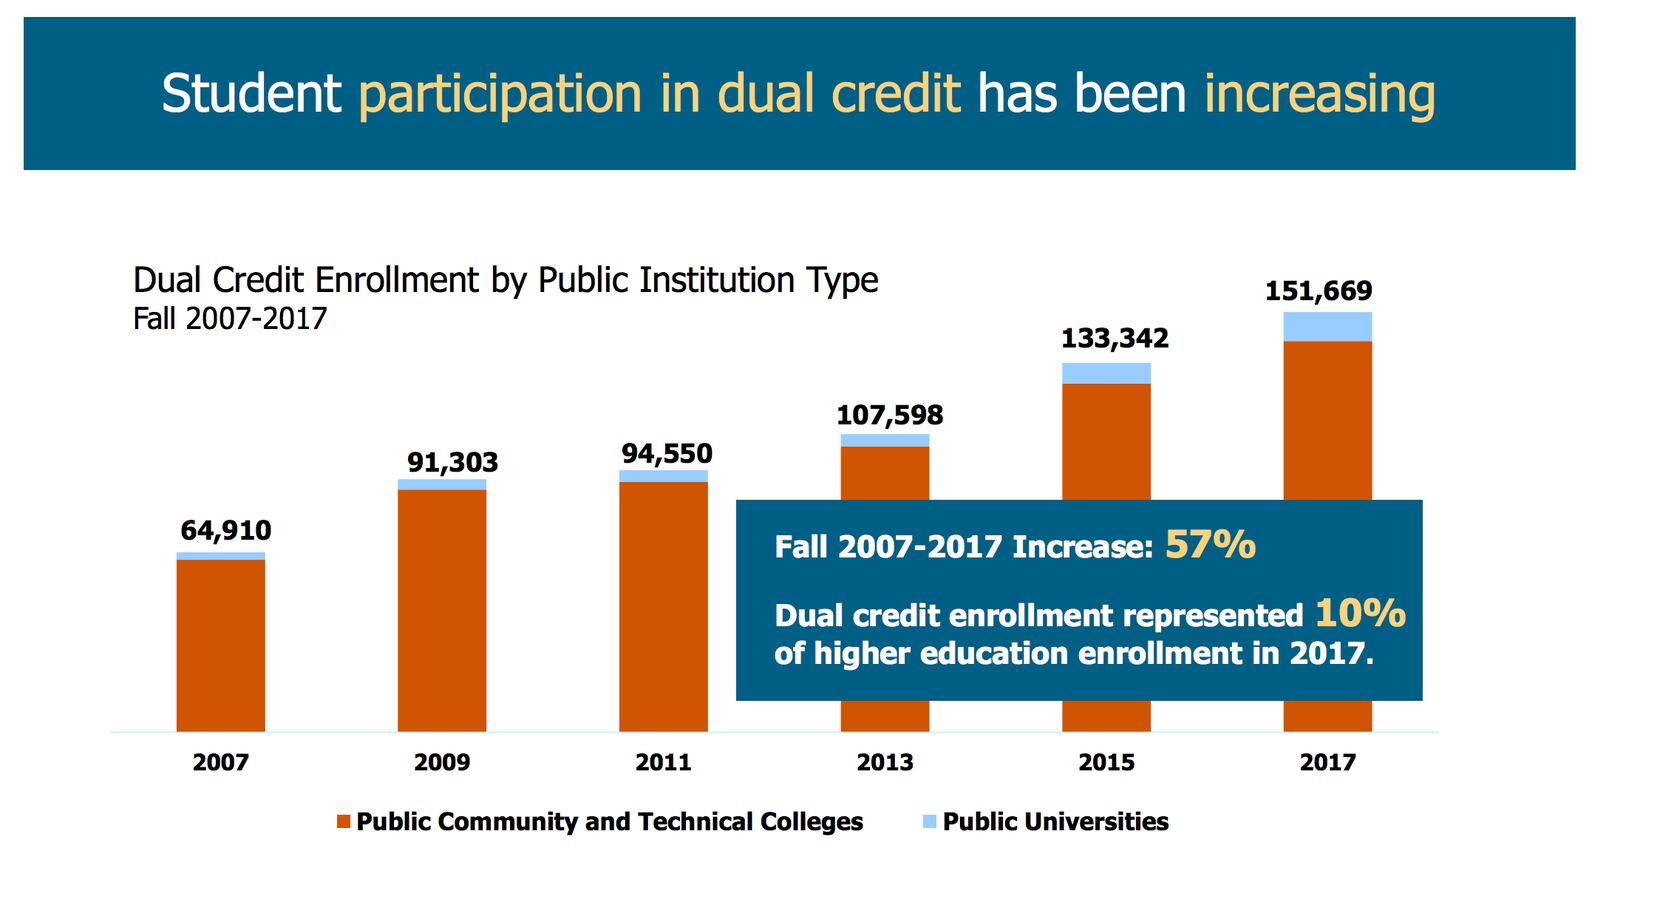 Source: Texas Higher Education Coordinating Board